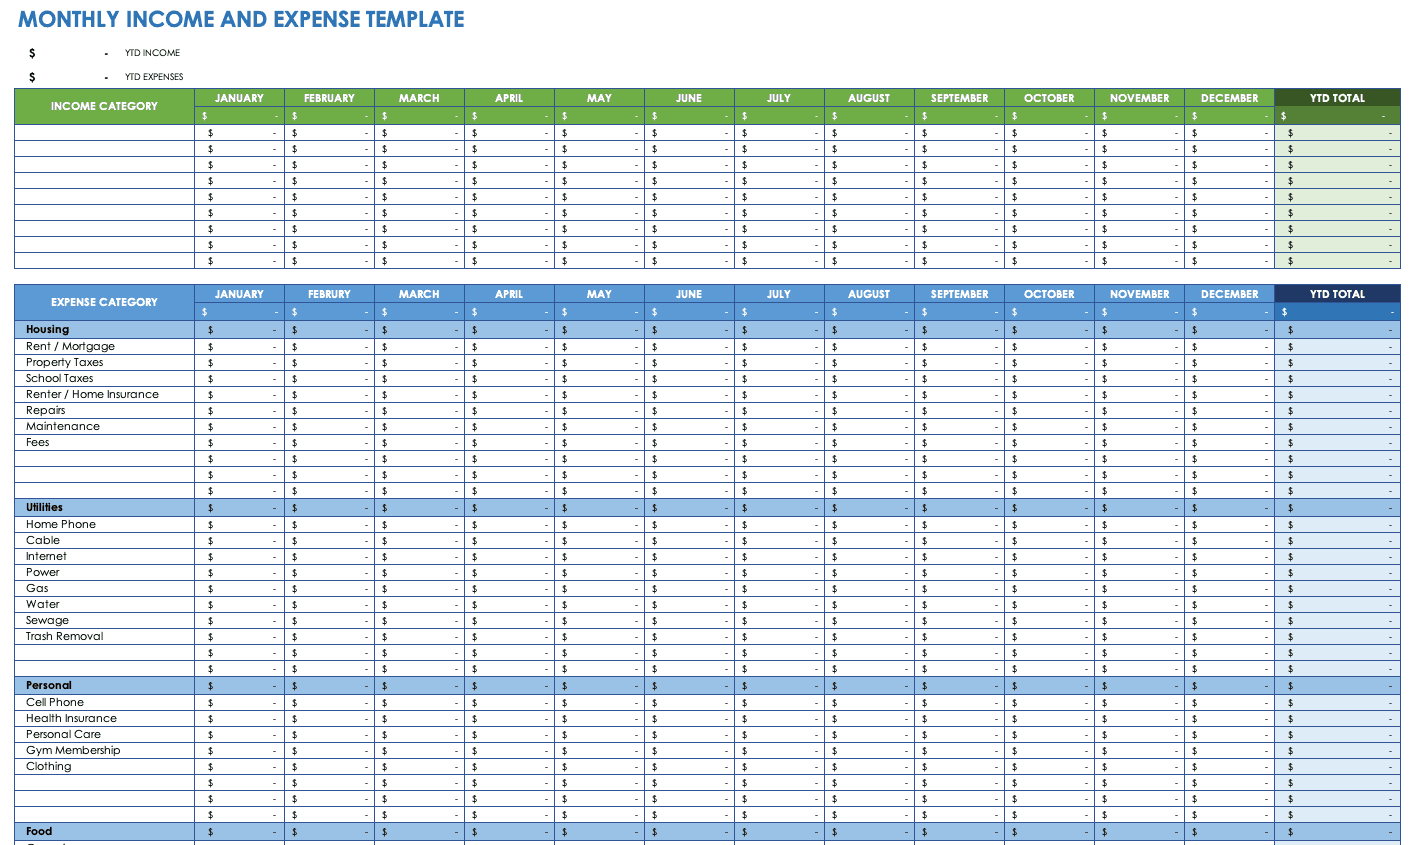 Monthly Income and Expense Template